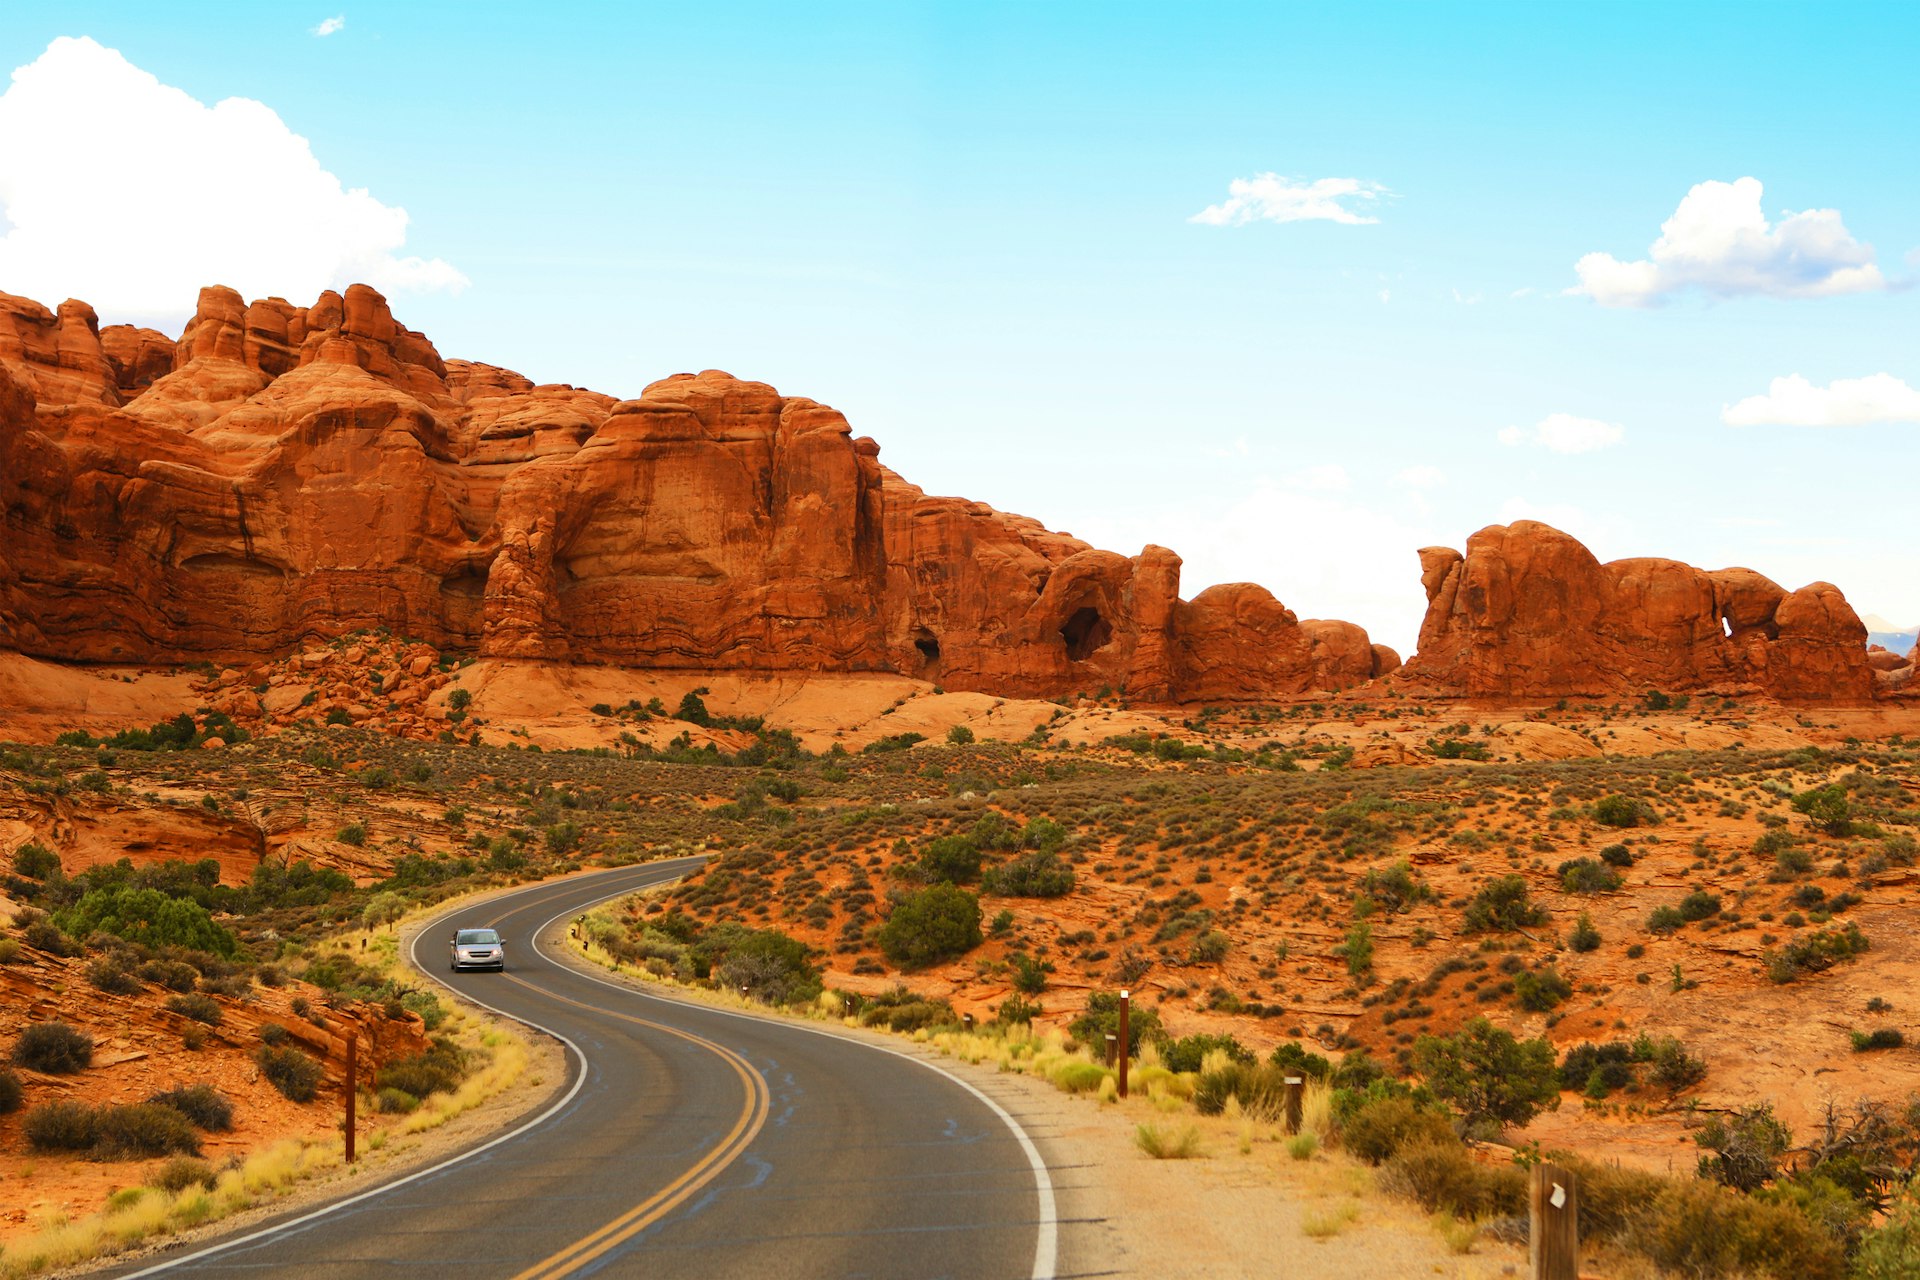 A car driving on a winding road through a rural area with large red rocks dominating the sccene